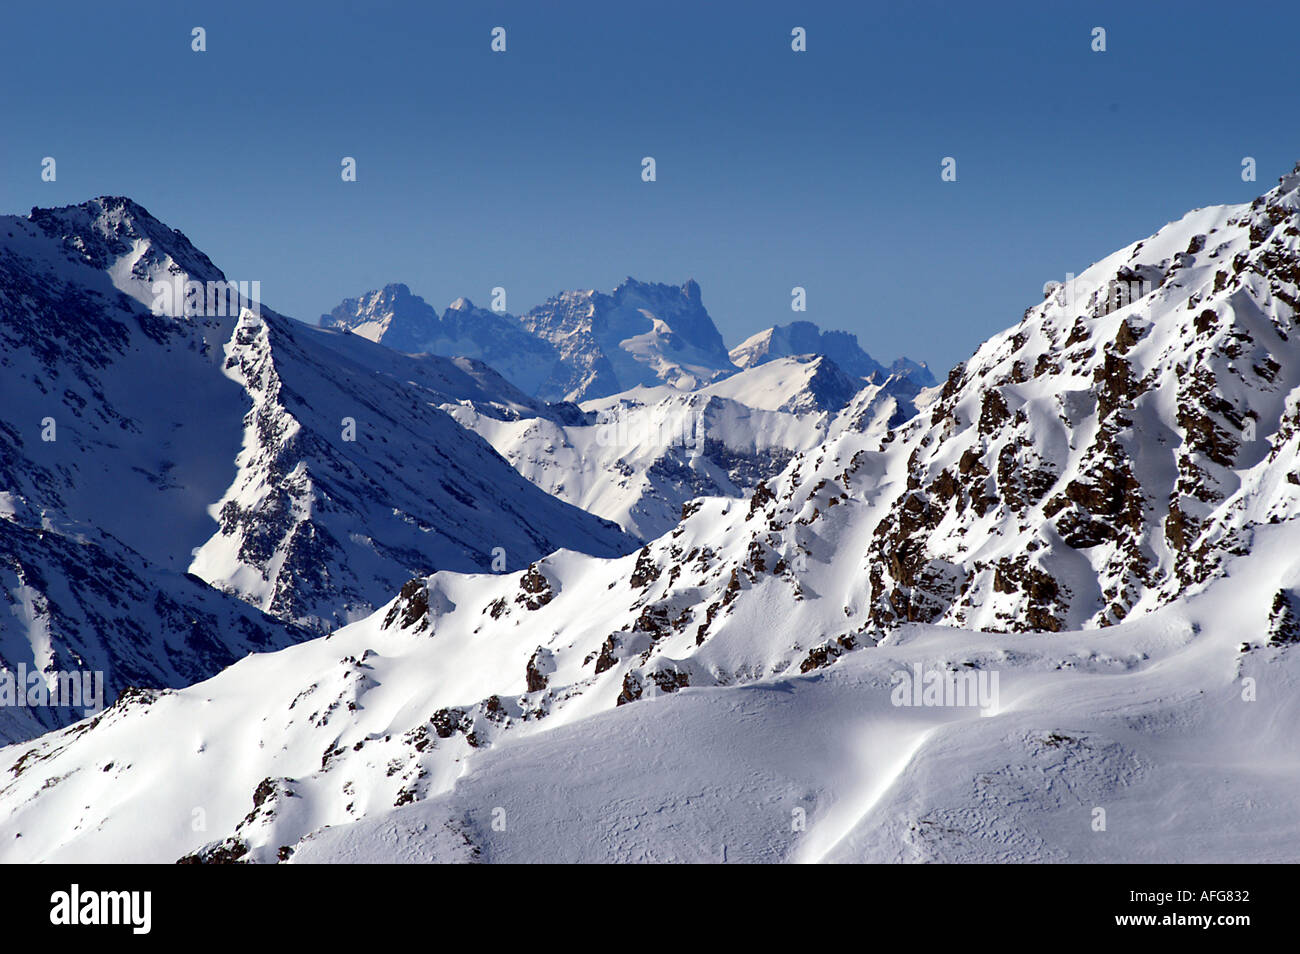 Mountain landscape in winter, near Val Cenis, France Stock Photo